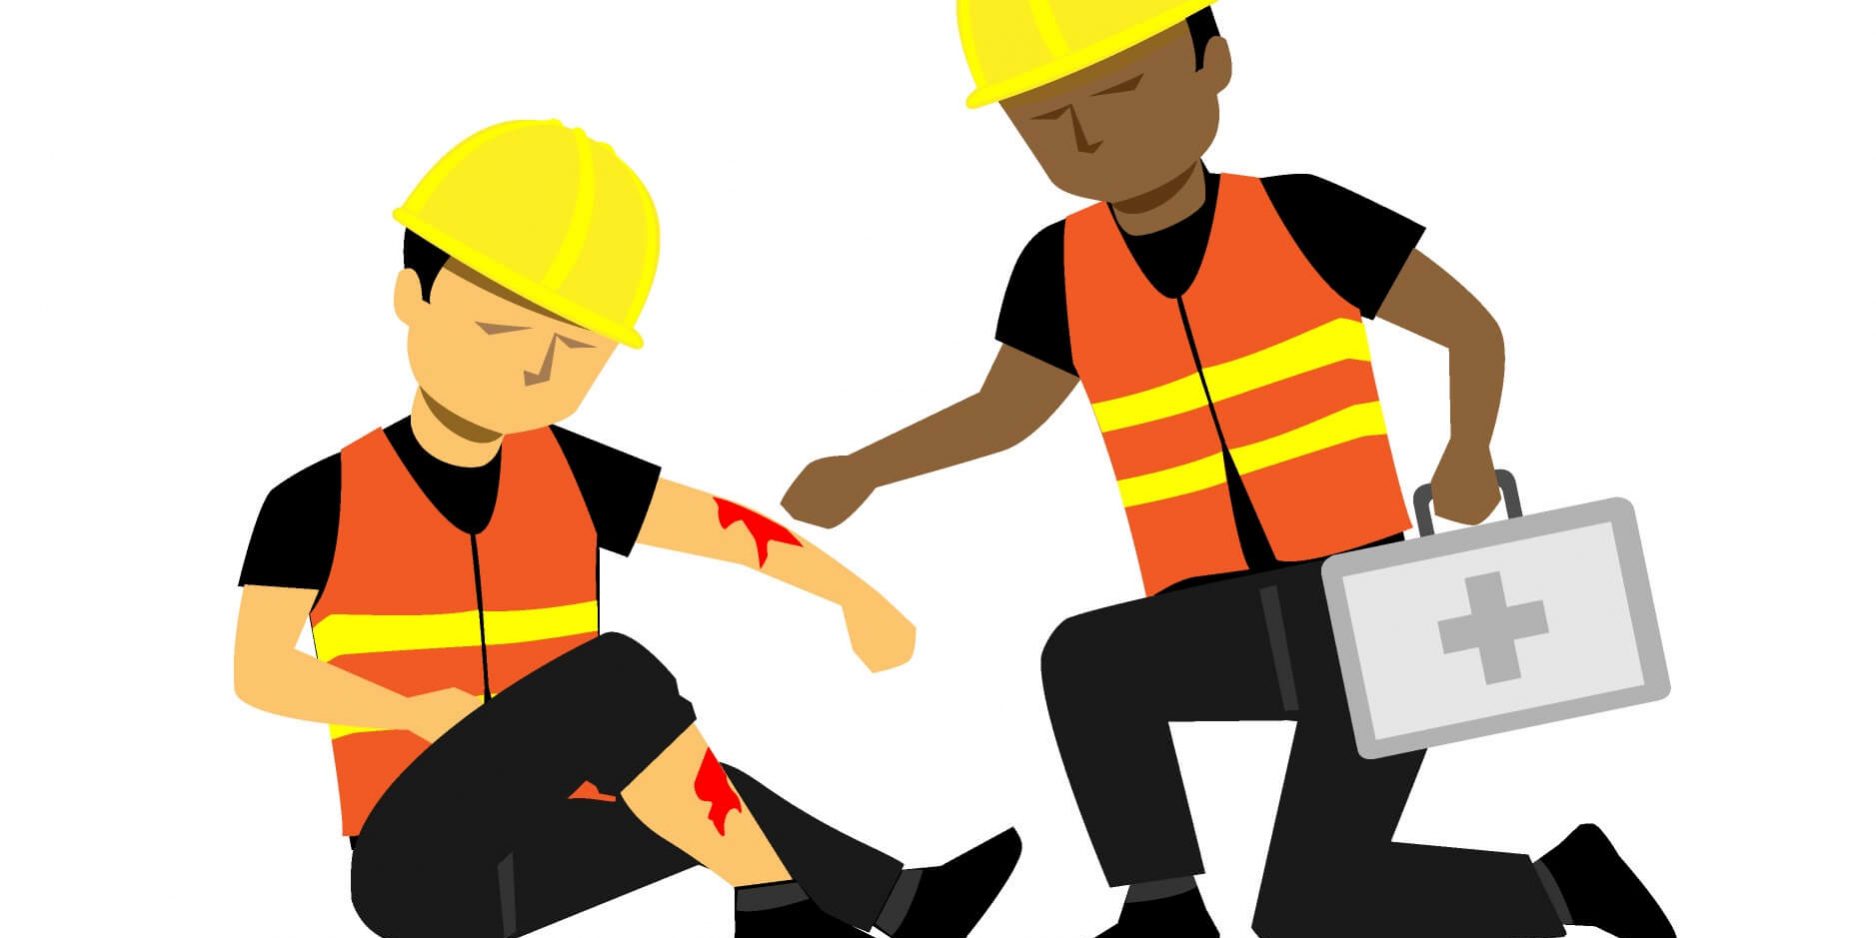 Injury clipart workers compensation. Basics of insurance for